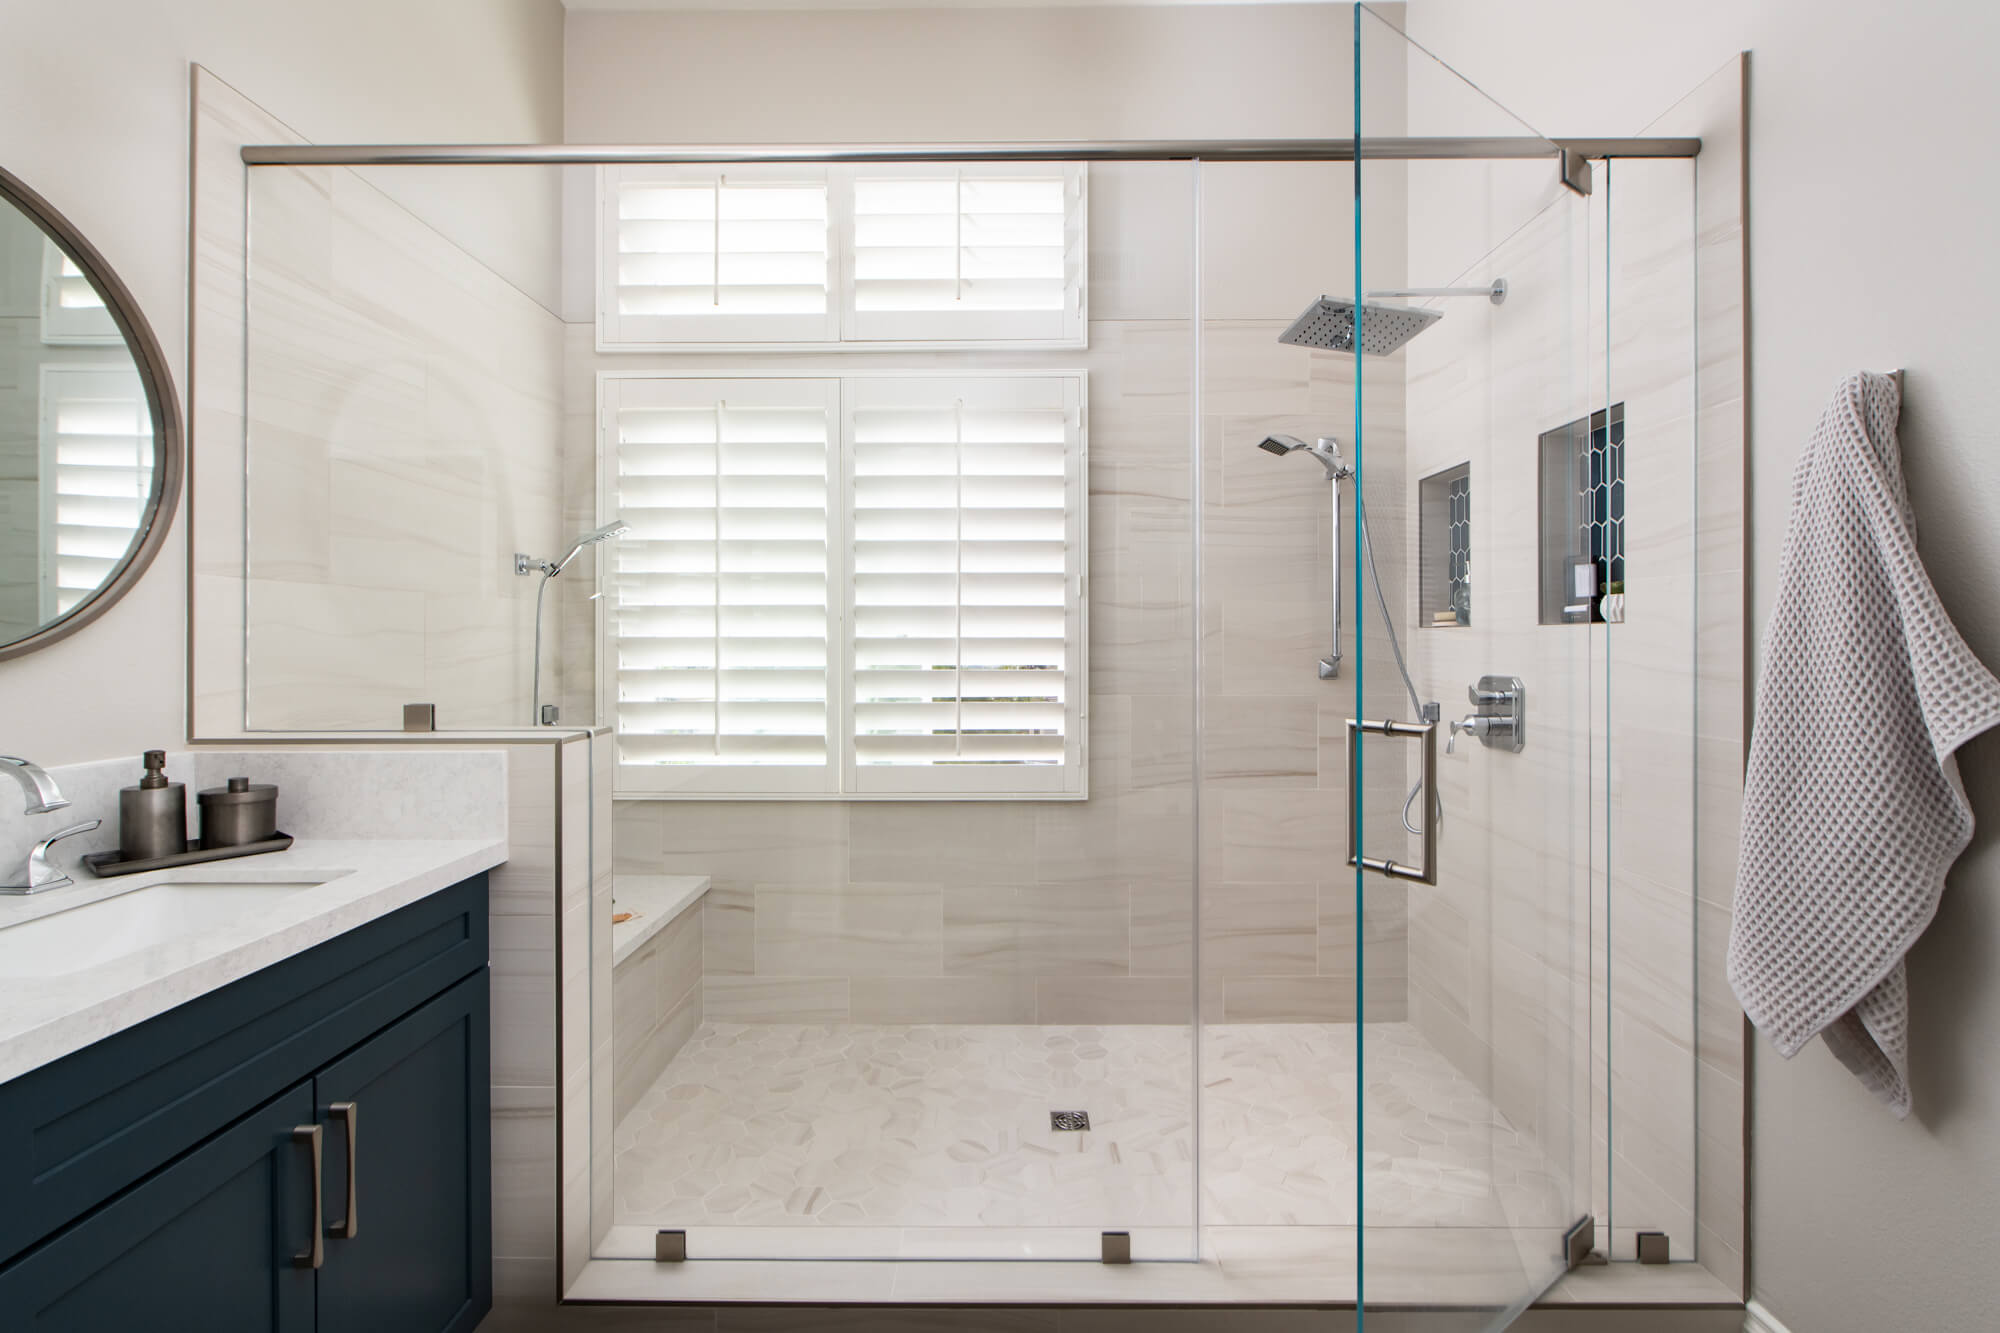 Foothill Ranch master bathroom remodel with large walk-in shower